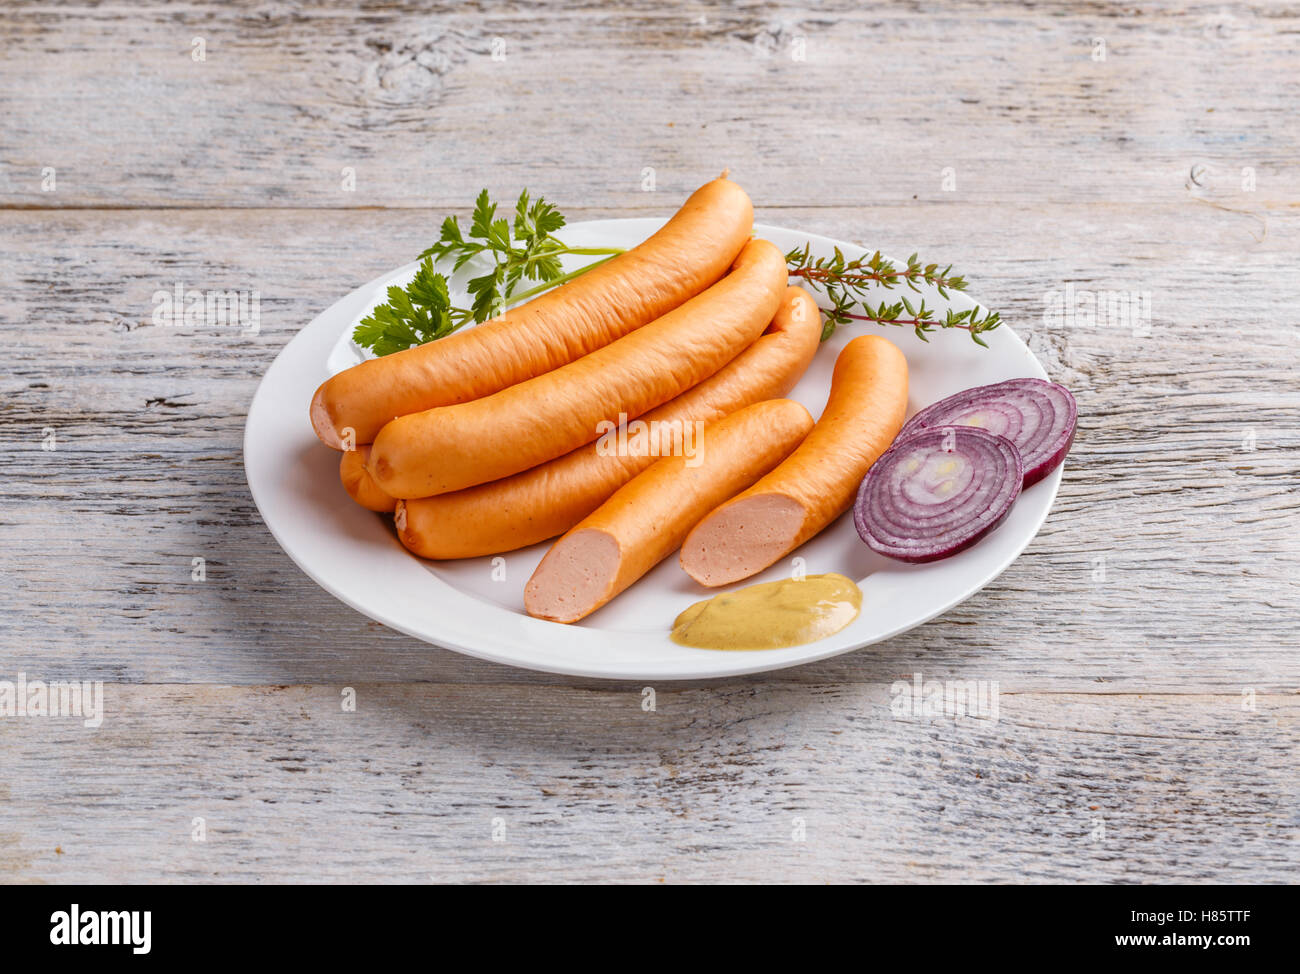 Hot Dog sausages on white plate Stock Photo